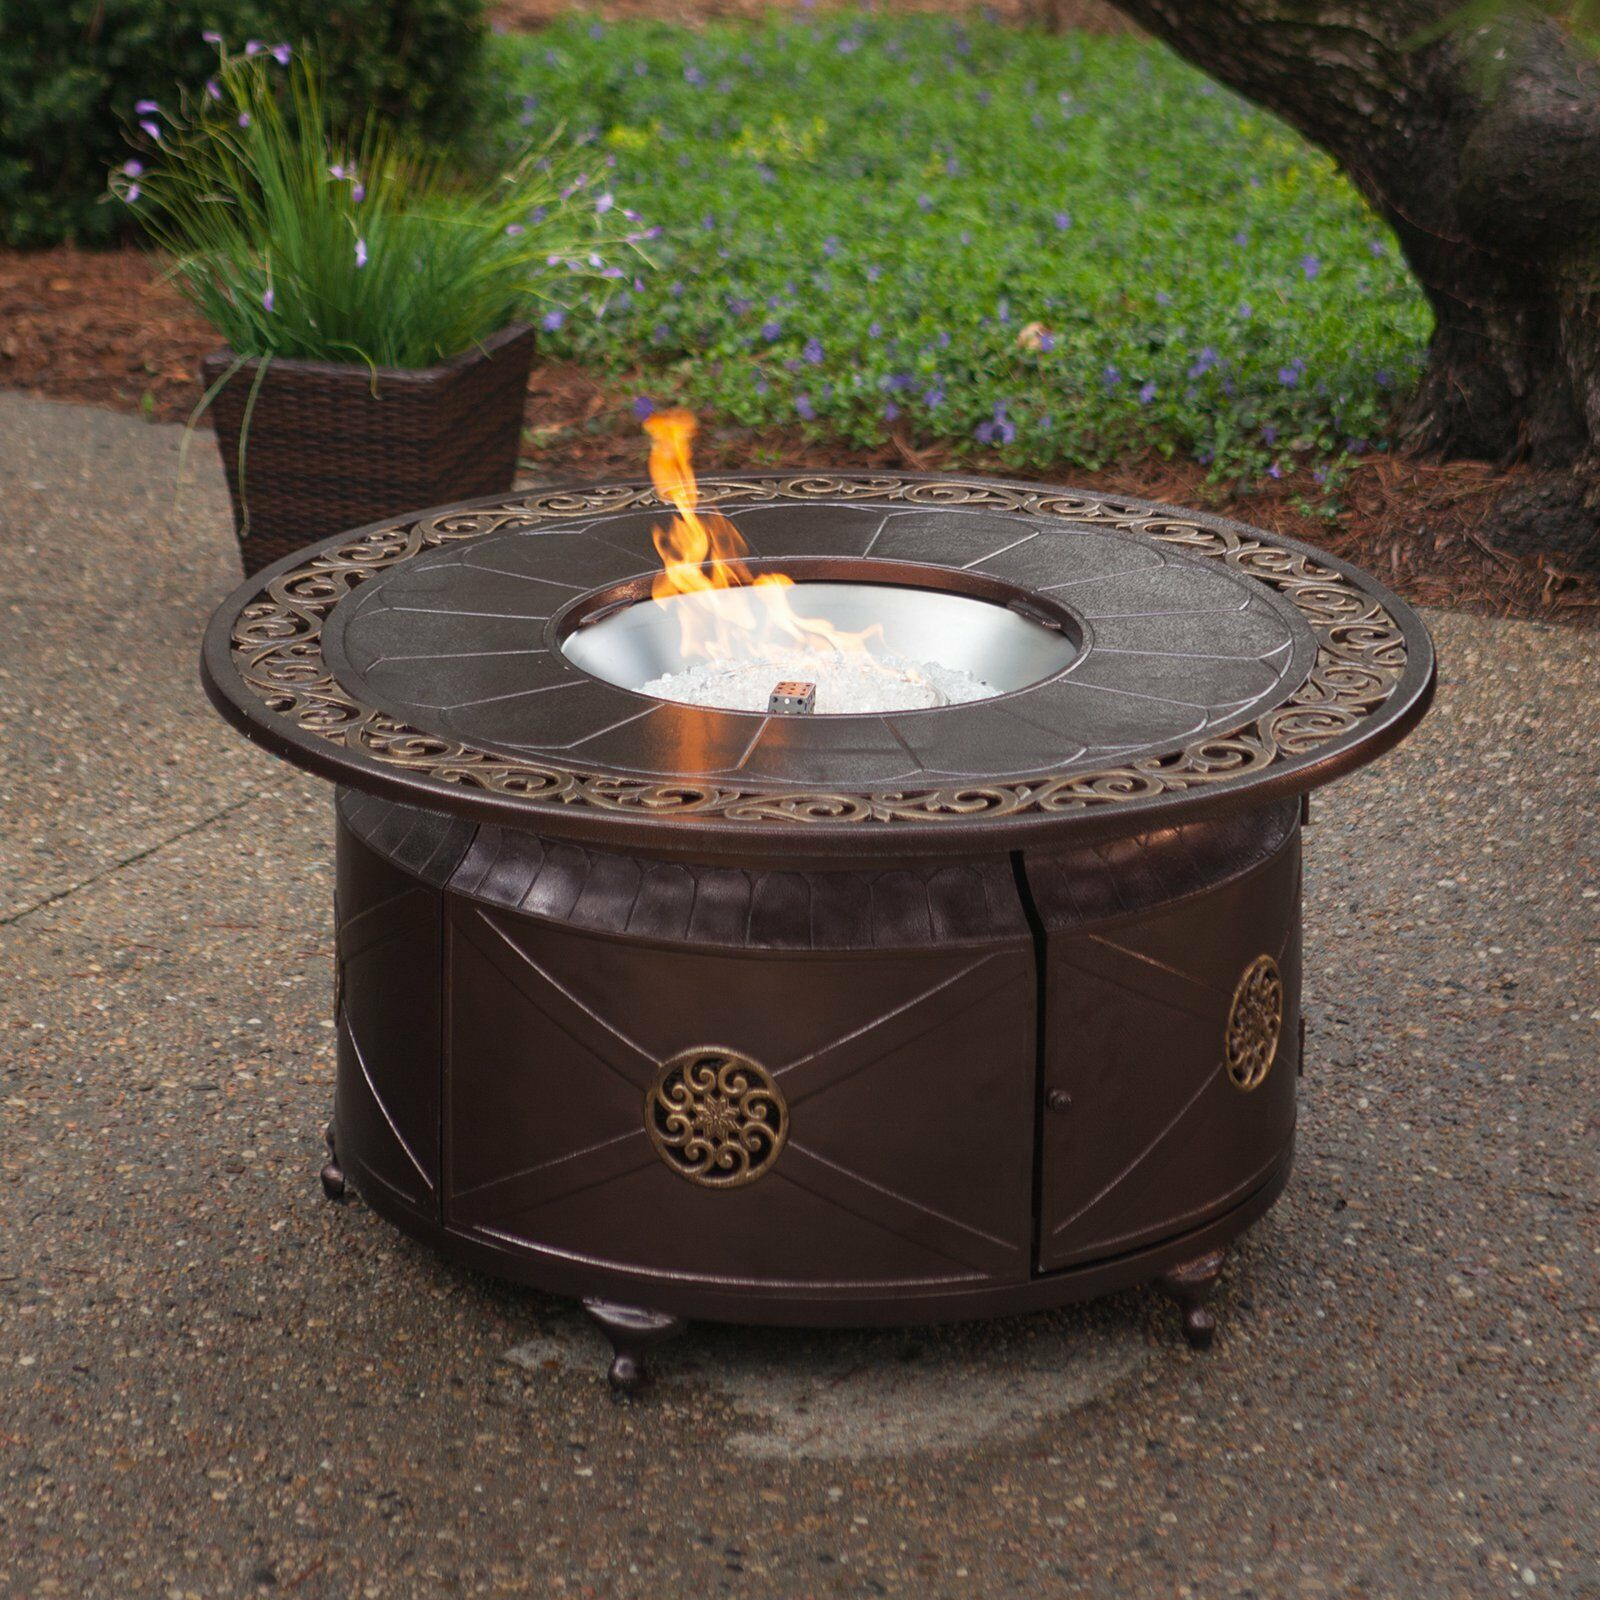 Propane Deck Fire Pit
 Fire Pit Table Burner Patio Deck Outdoor Fireplace Propane